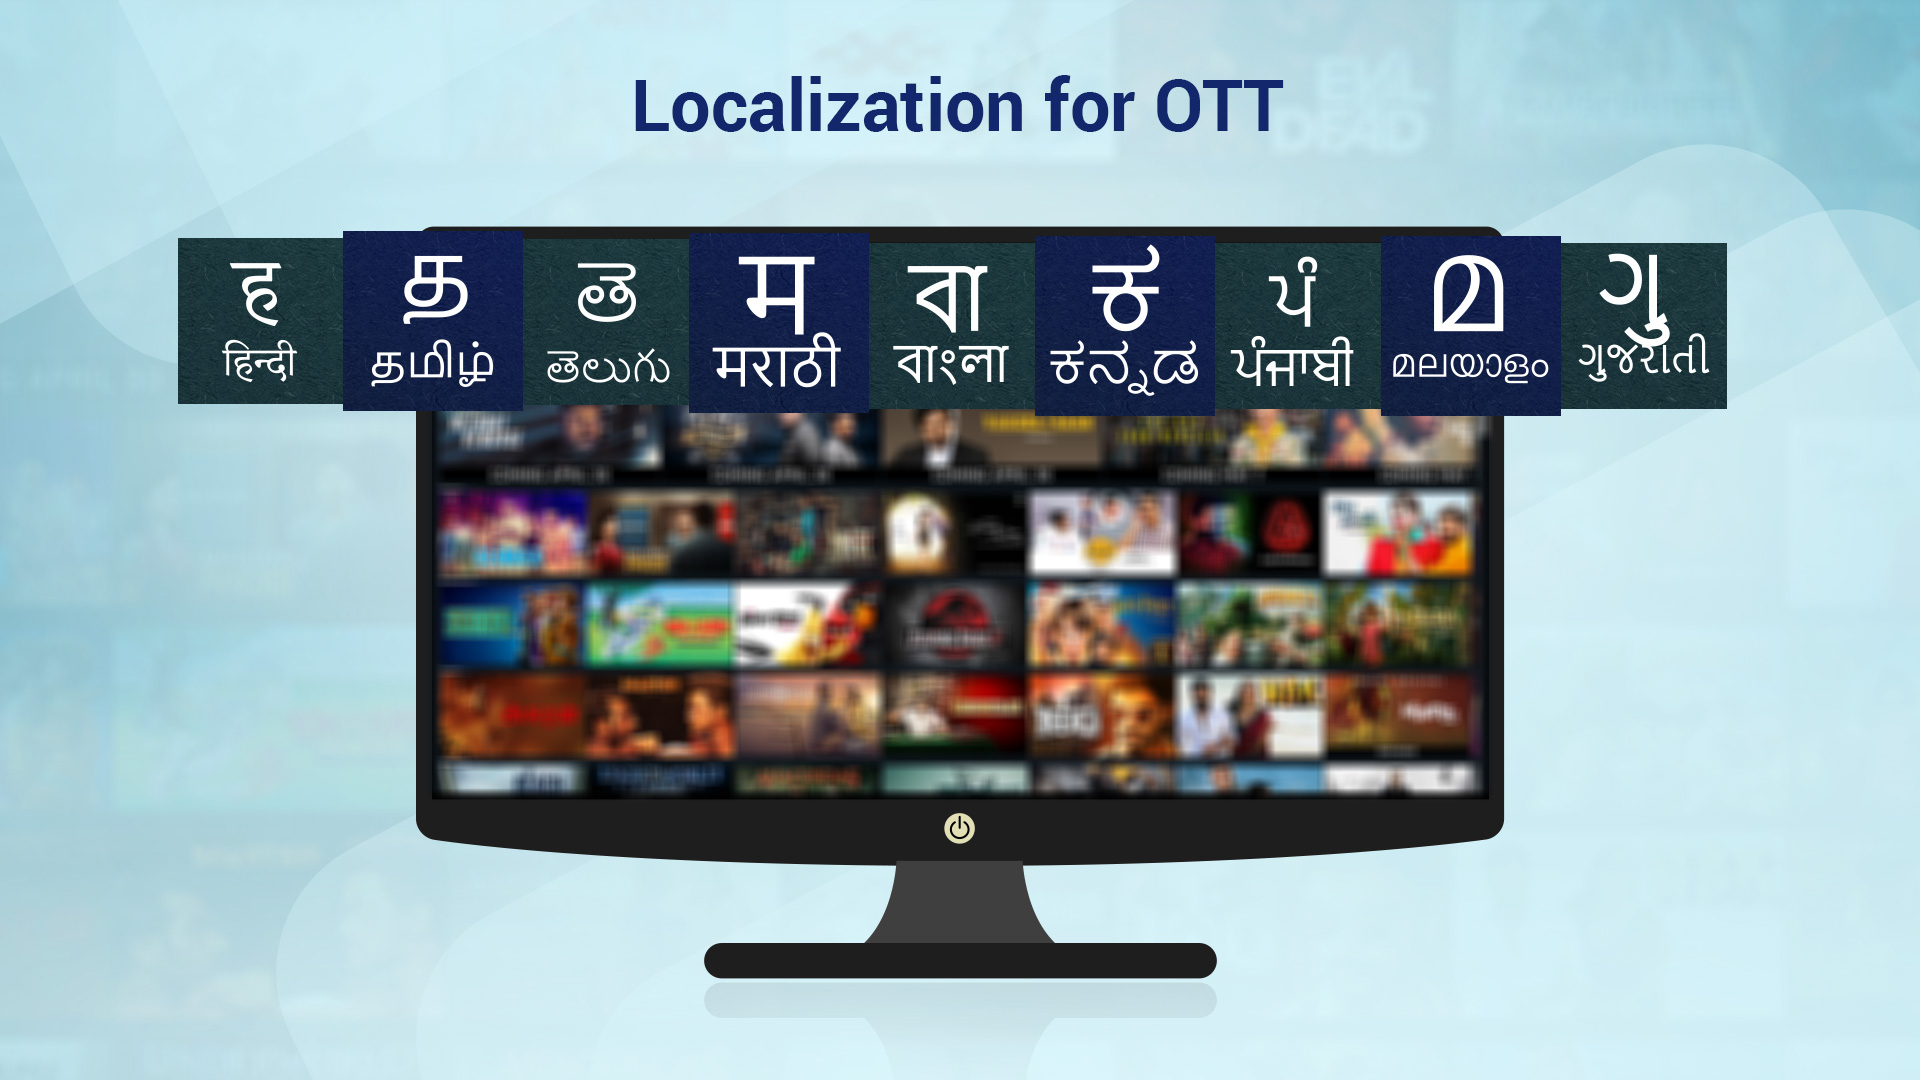 Meet Global and Local needs for OTT through Localization!!